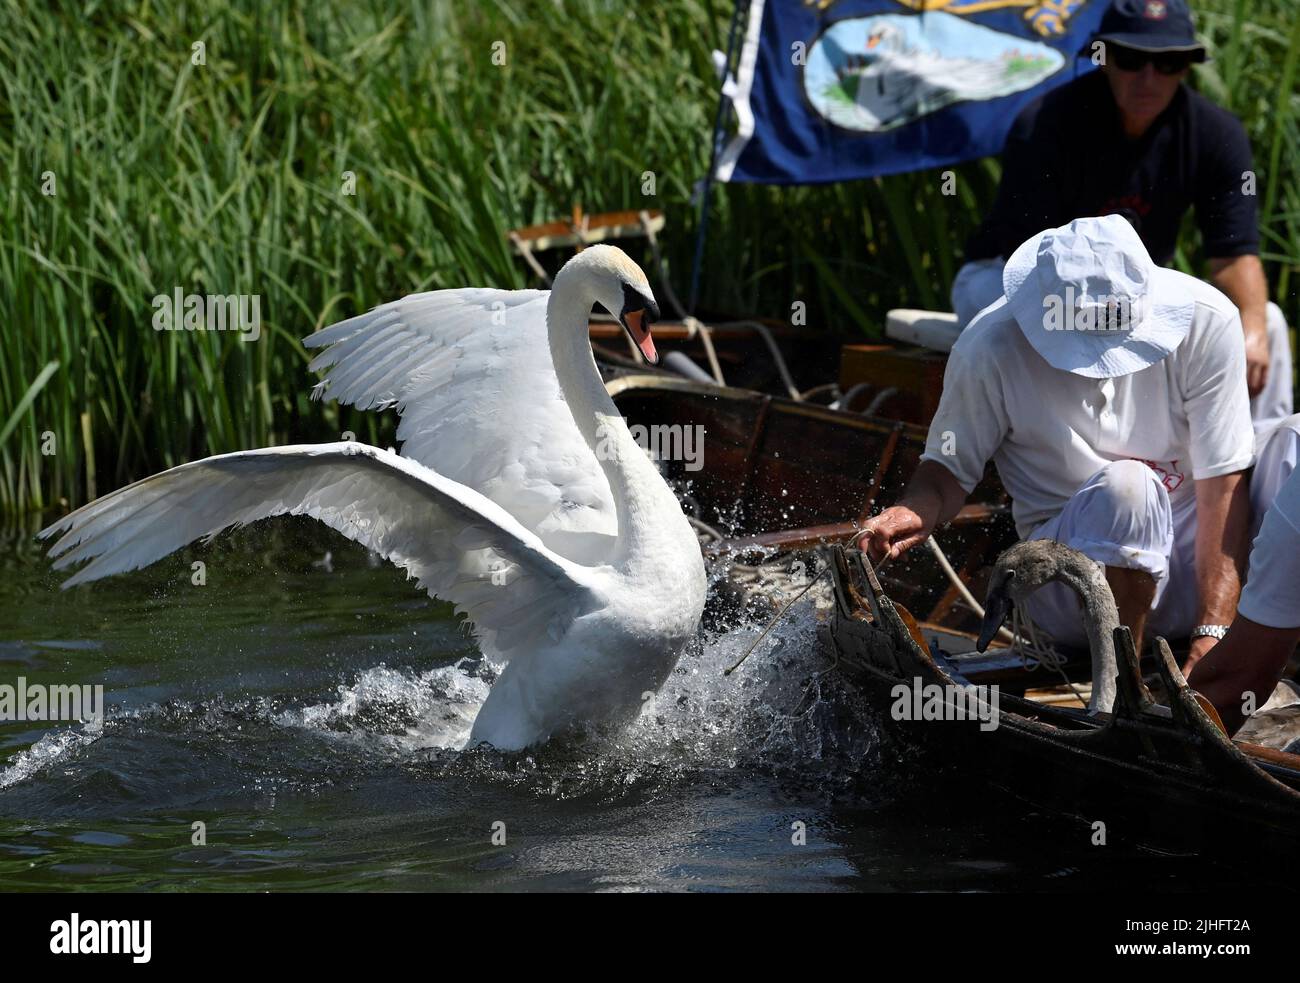 A swan reacts as Swan Uppers record details of cygnets during the annual census of the swan population along sections of the River Thames, Shepperton near Windsor, Britain, July 18, 2022. REUTERS/Toby Melville Stock Photo